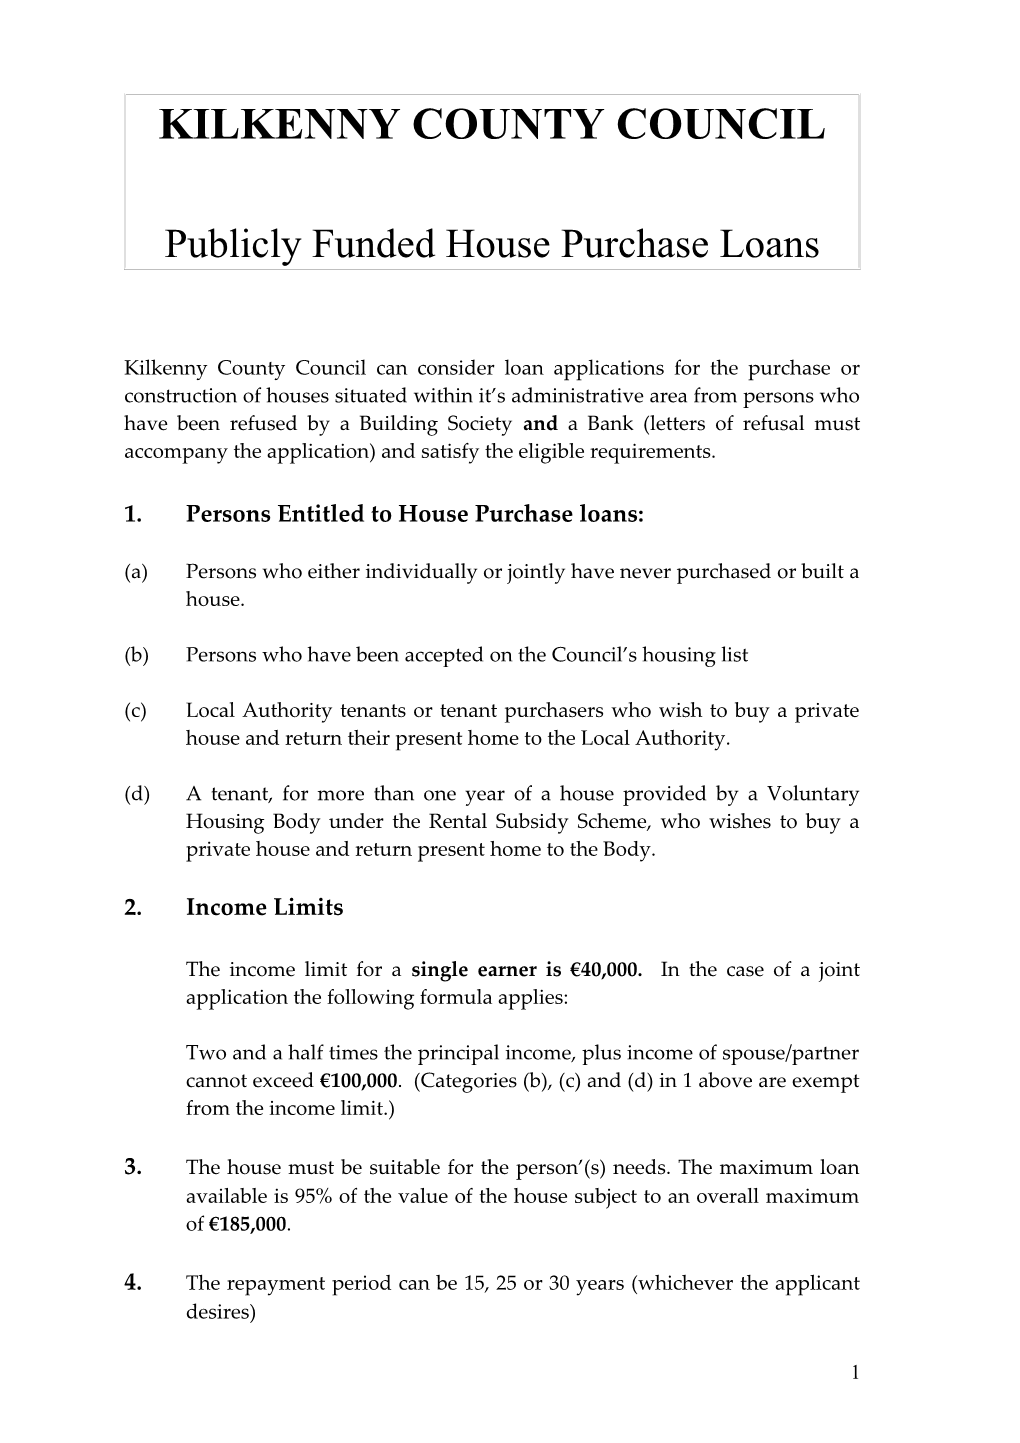 Publicly Funded House Purchase Loans